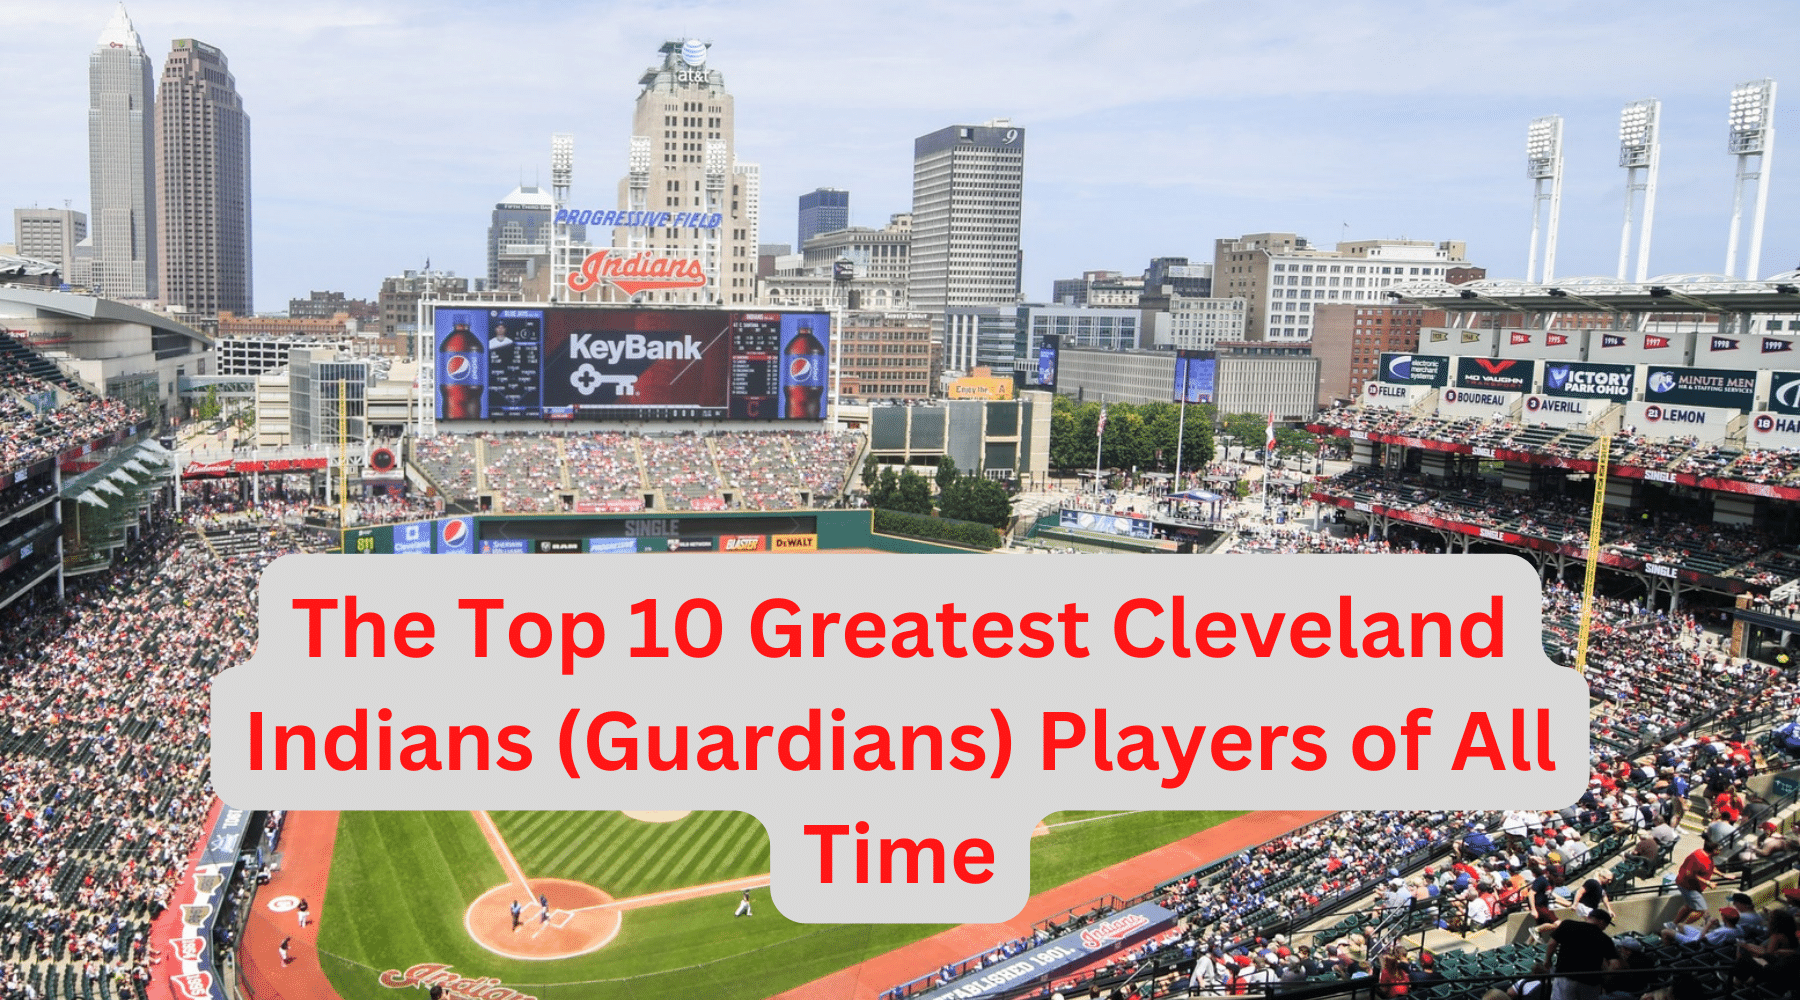 The Top 10 Greatest Cleveland Indians (Guardians) Players of All Time